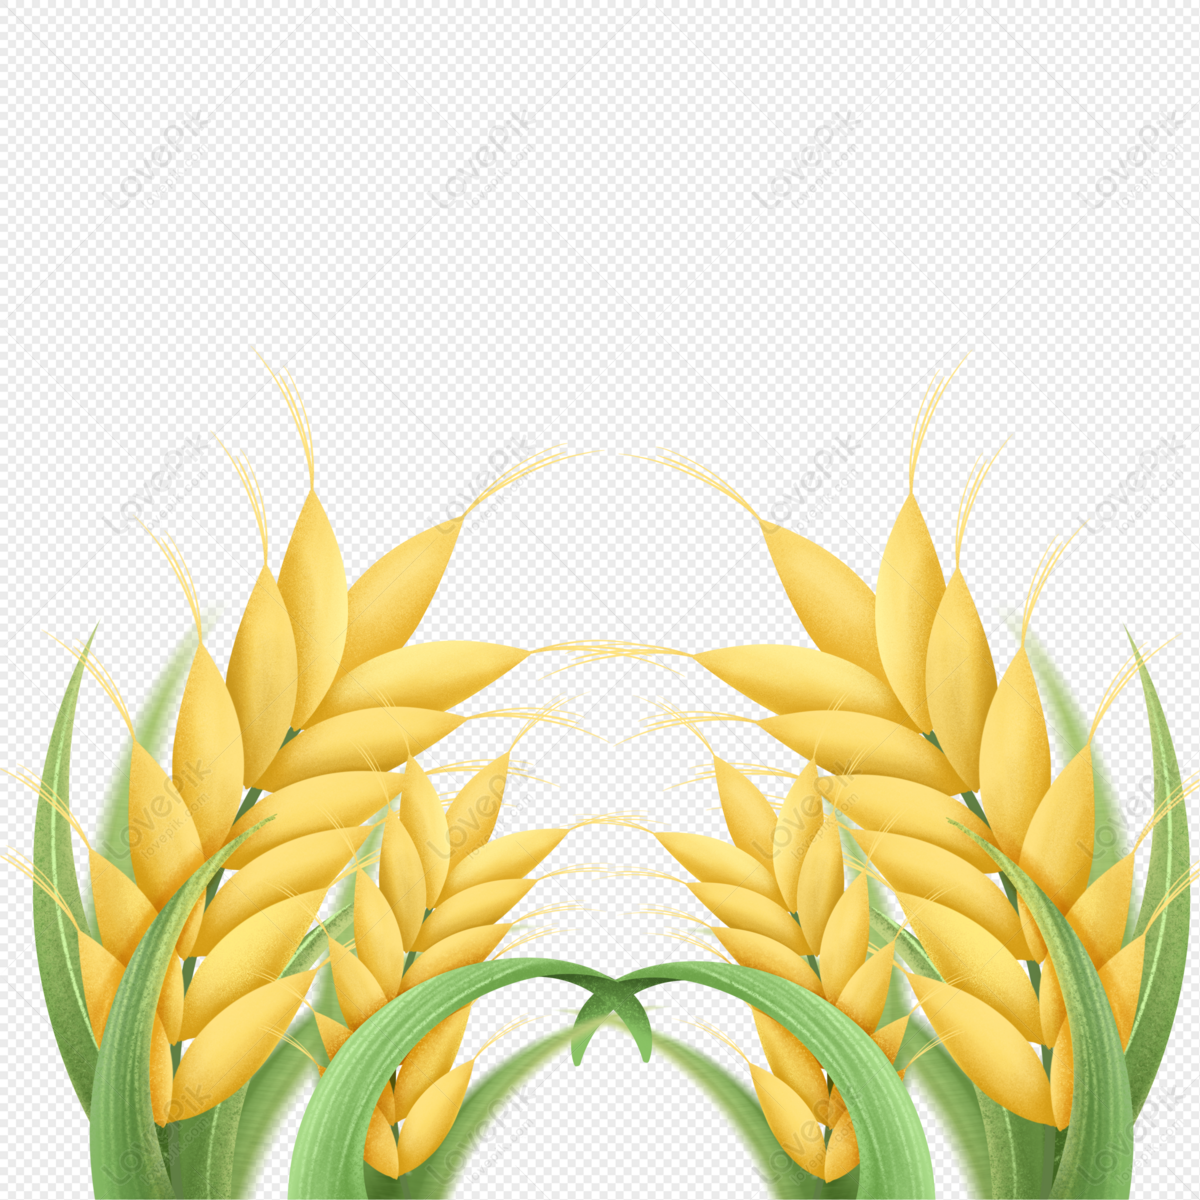 Grain Wheat PNG Transparent And Clipart Image For Free Download - Lovepik |  401931506